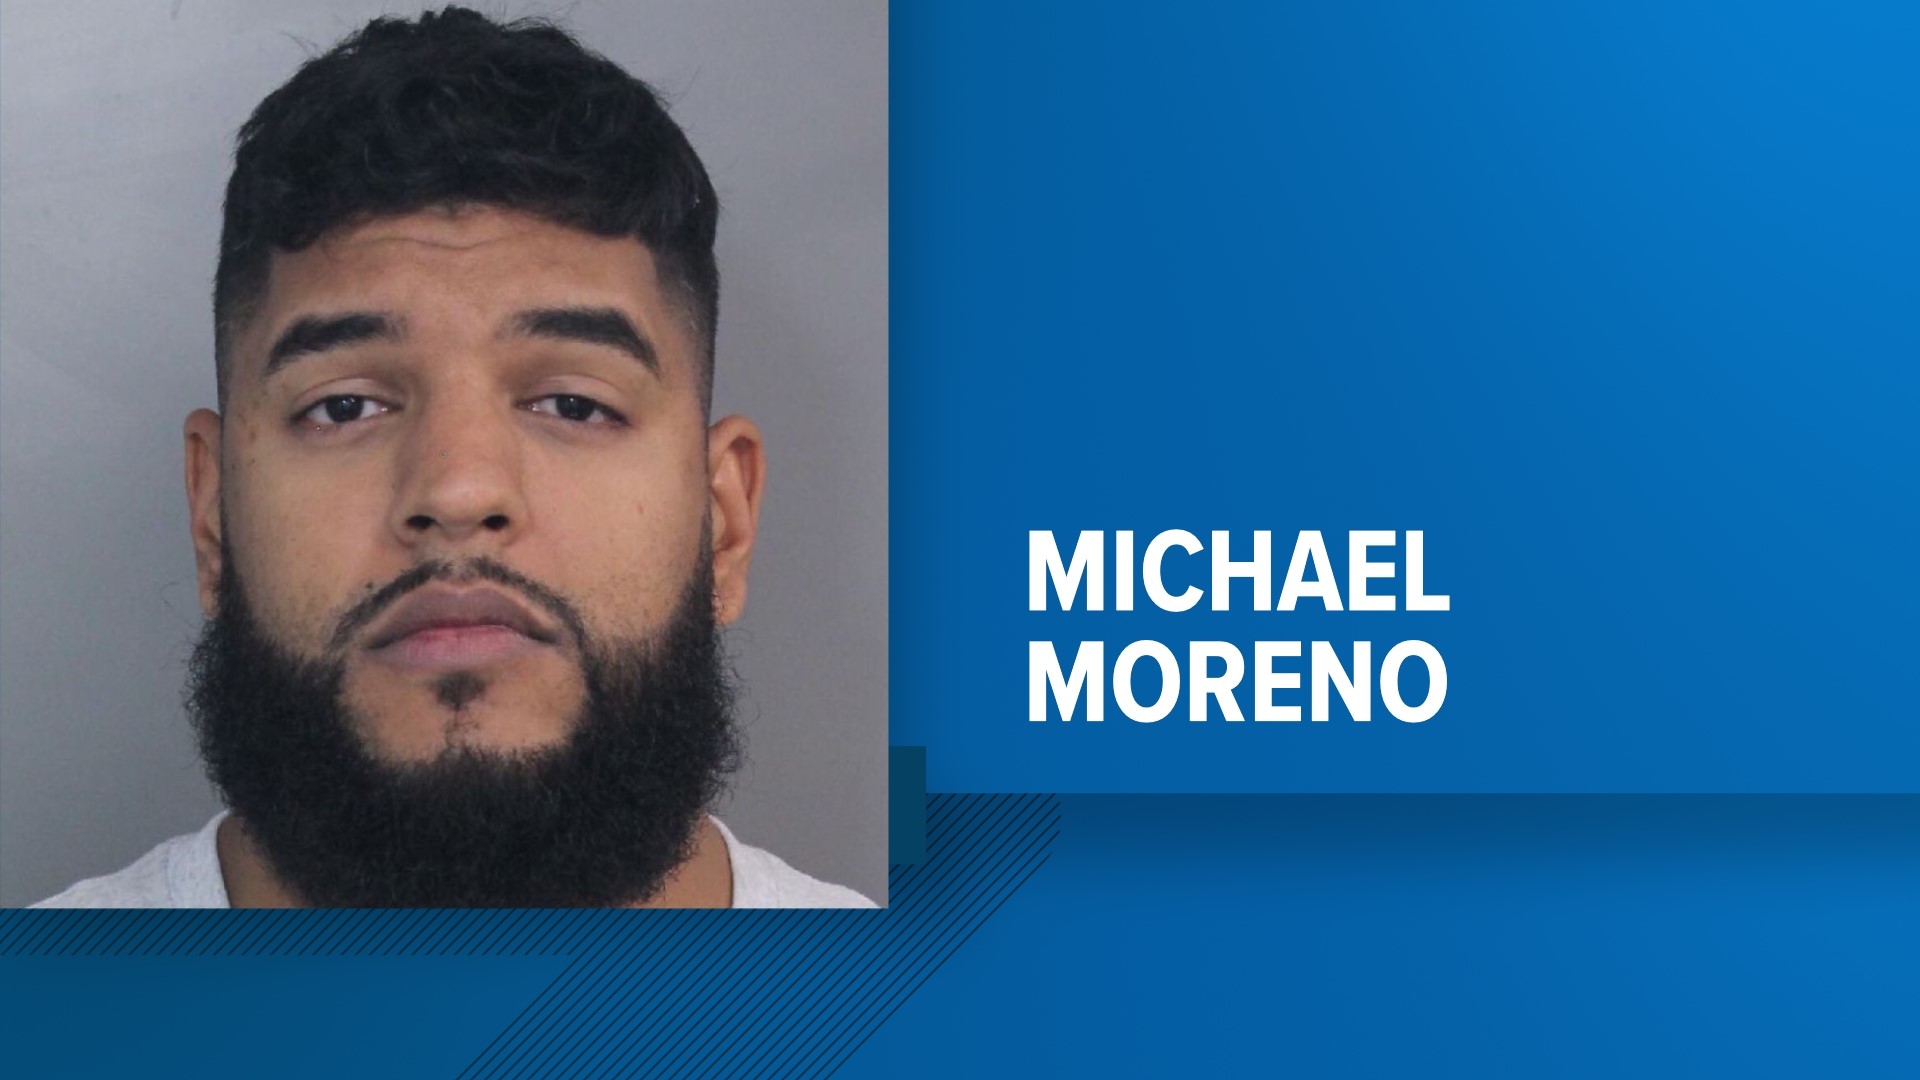 Slate Belt Regional Police say Michael Moreno's blood-alcohol level was more than twice the legal limit when found behind the wheel in September.